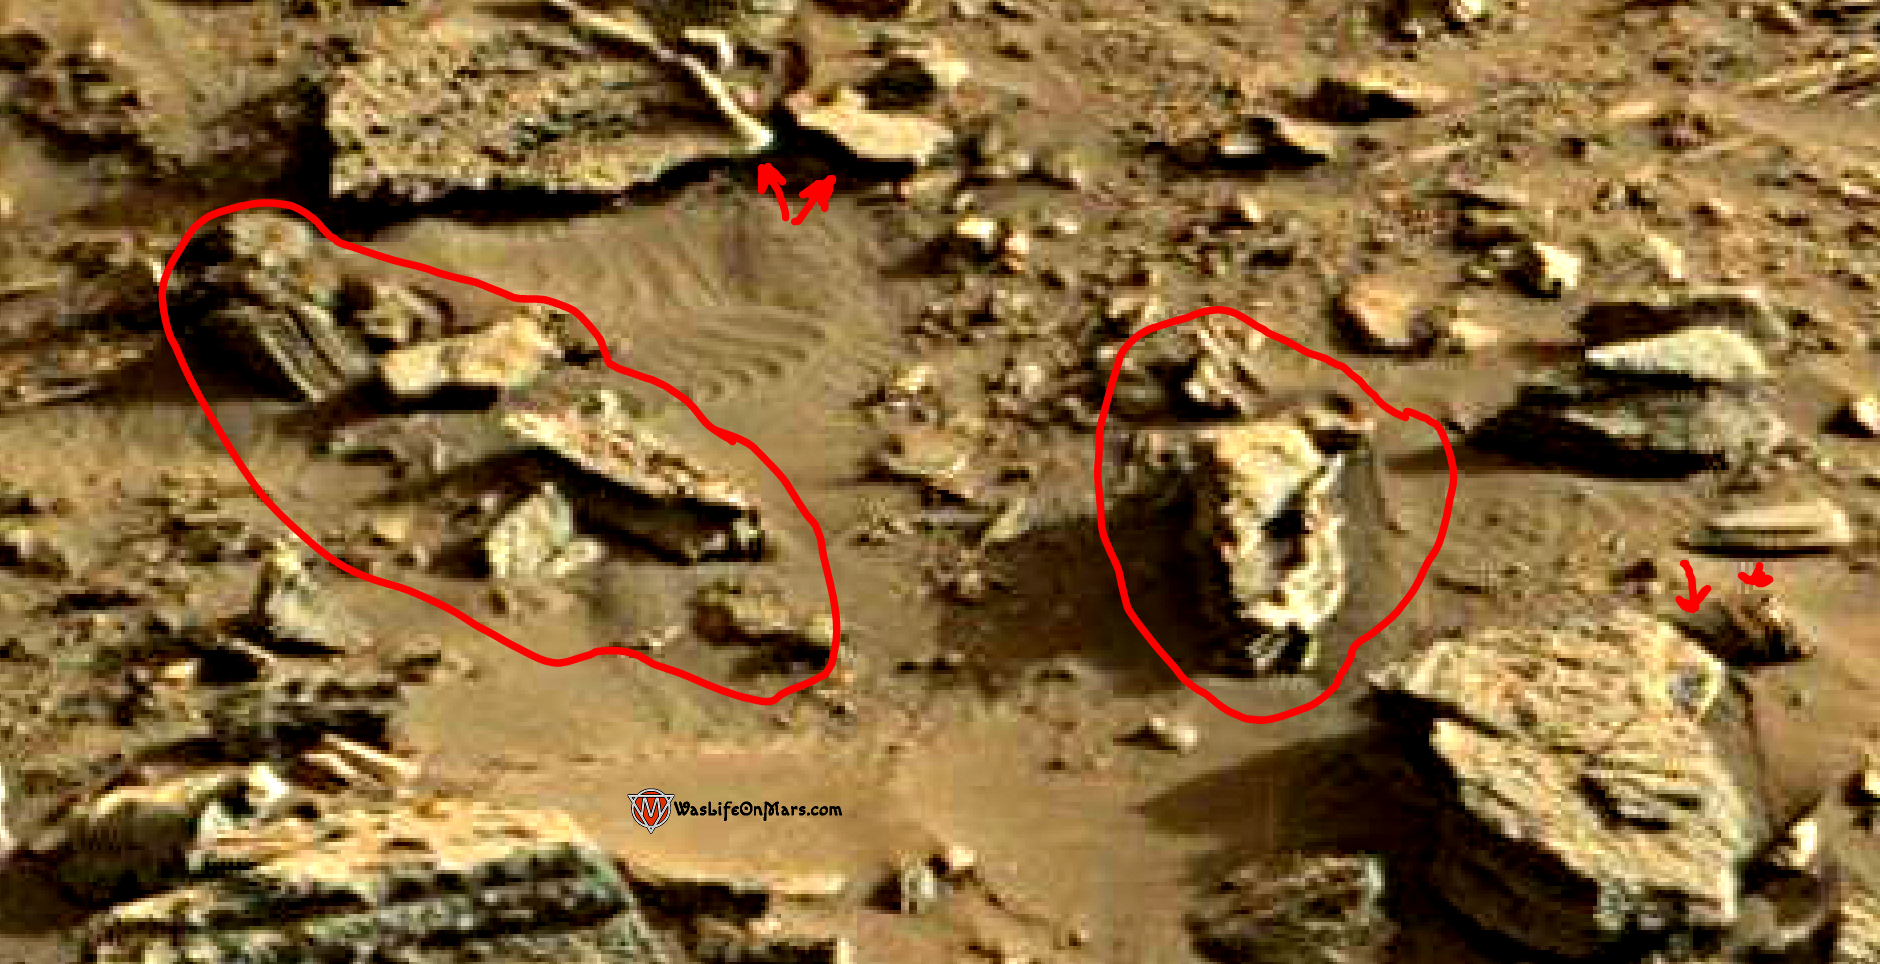 mars sol 1419 anomaly artifacts 7a1 was life on mars